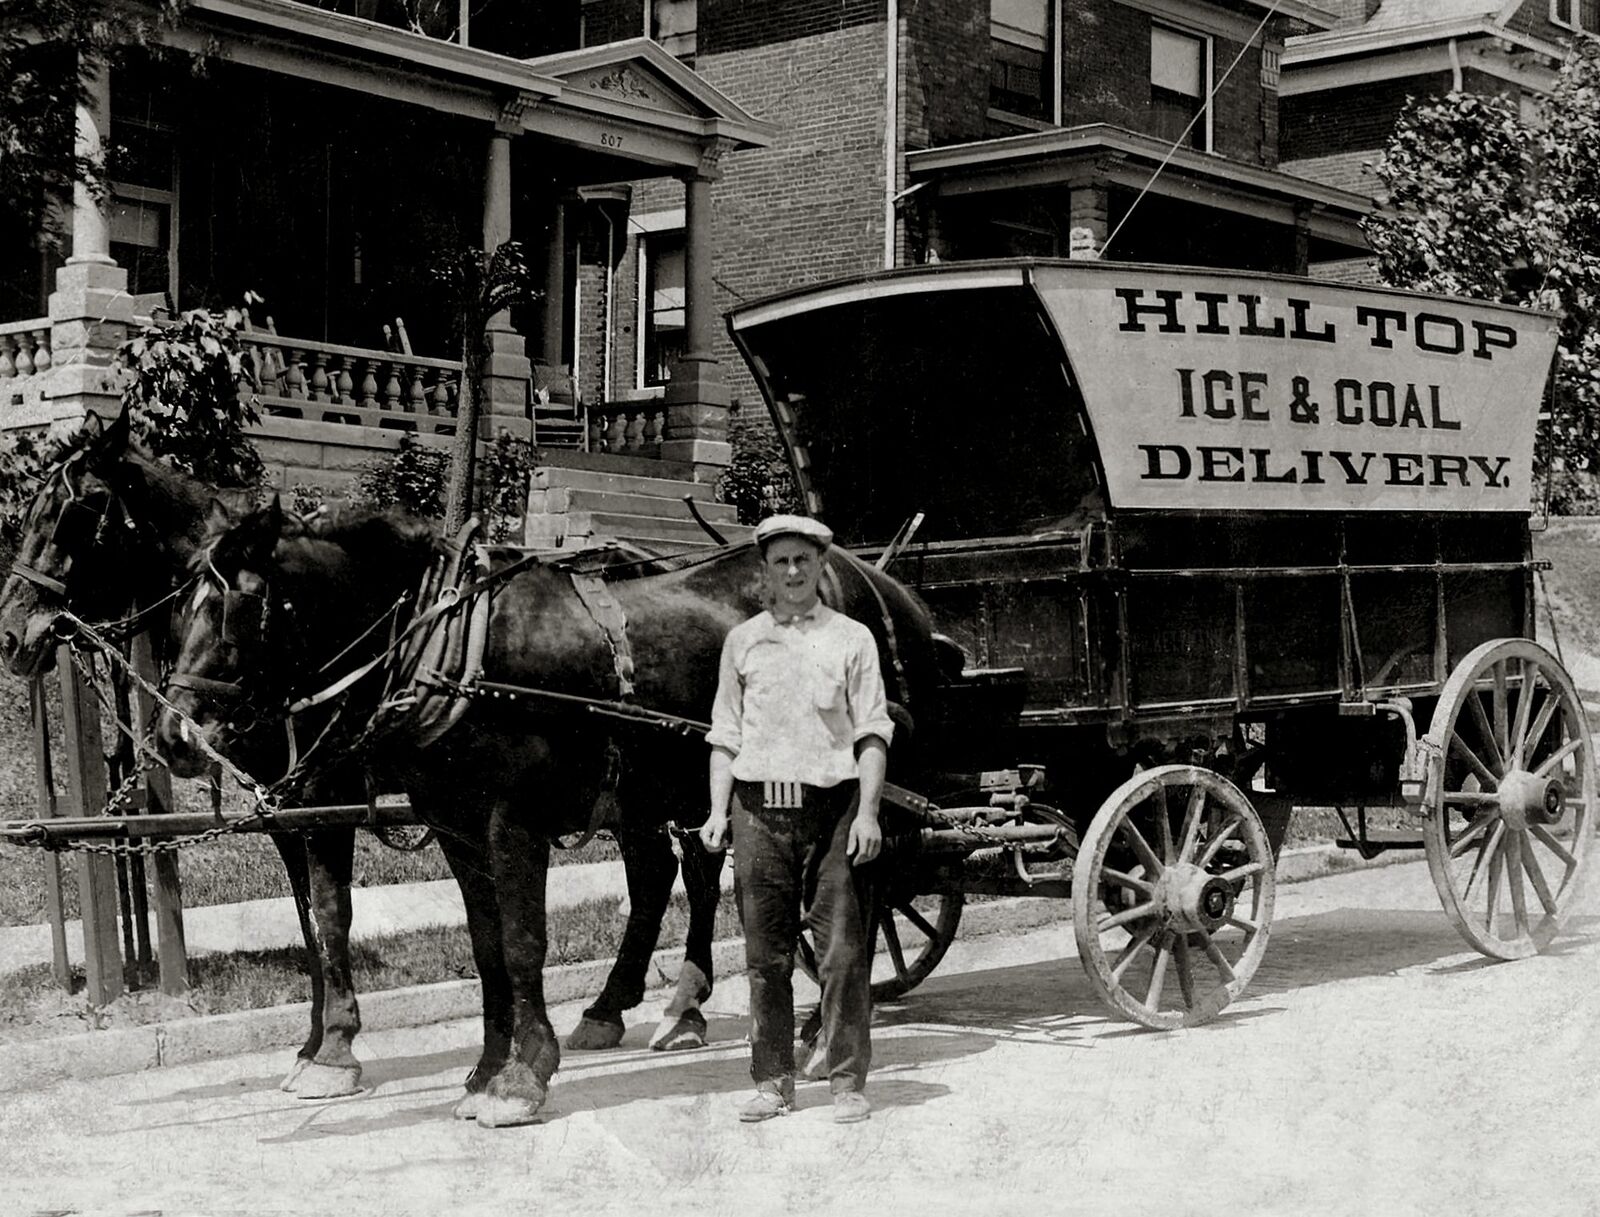 1910 ICE & COAL DELIVERY TRUCK Photo  (188-p)